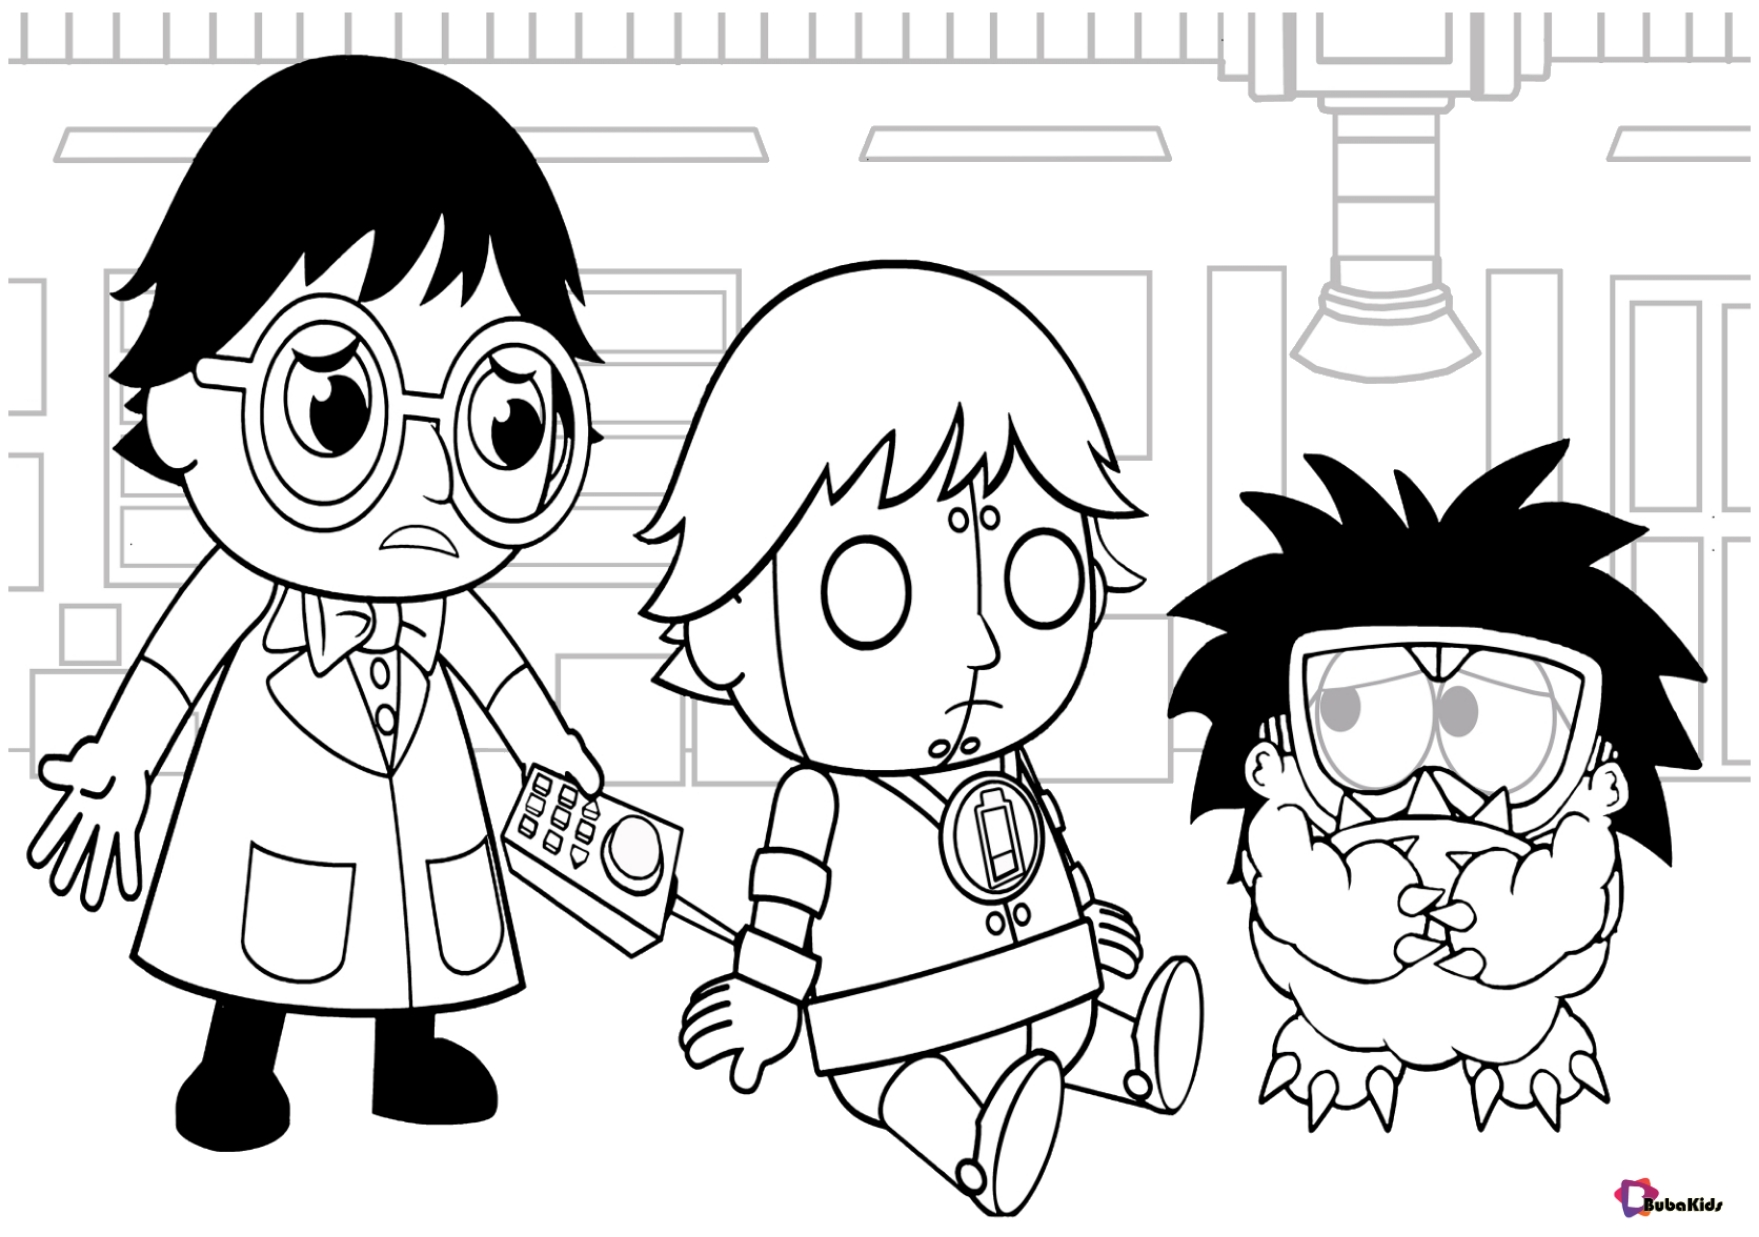 Ryan’s world cartoon coloring pages